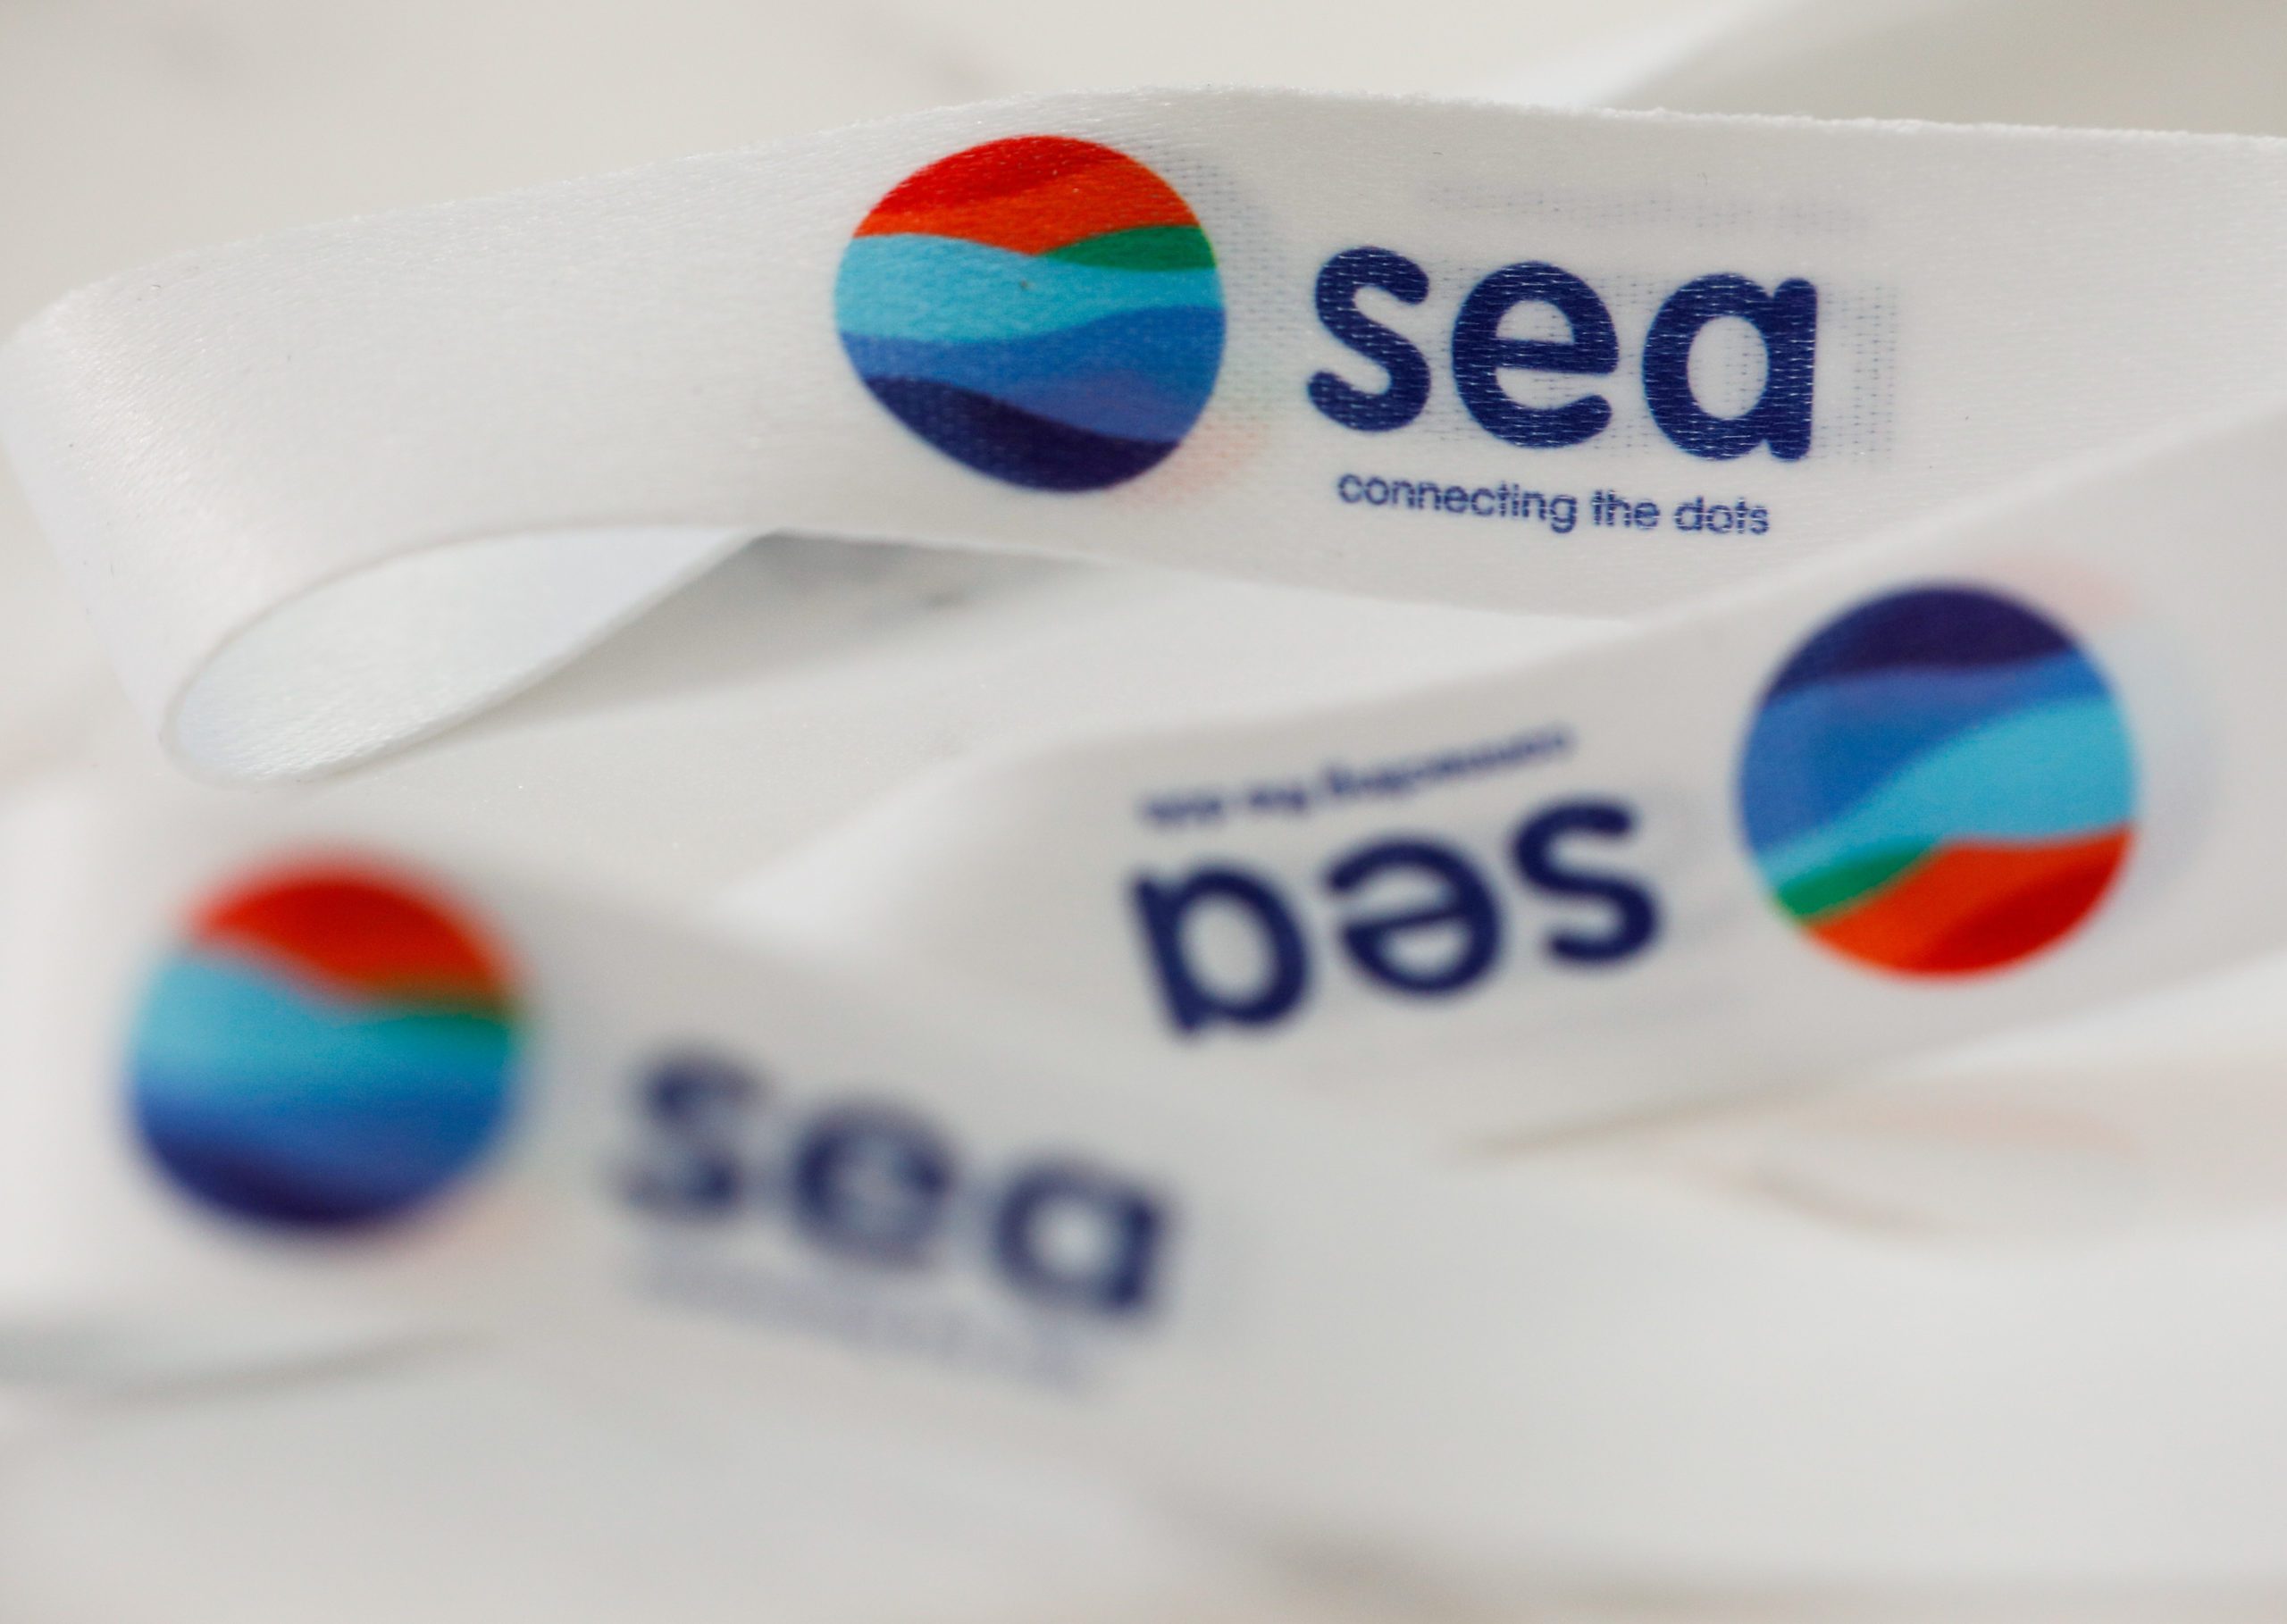 Sea Ltd reports $144m loss in Q3 as it chases high-growth strategy